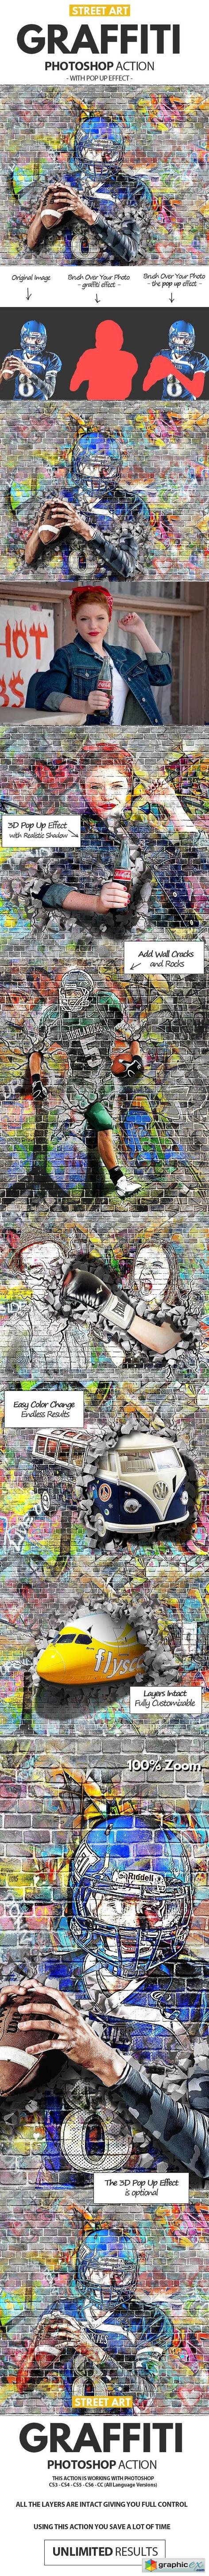 Graffiti Effect with Pop Up Photoshop Action